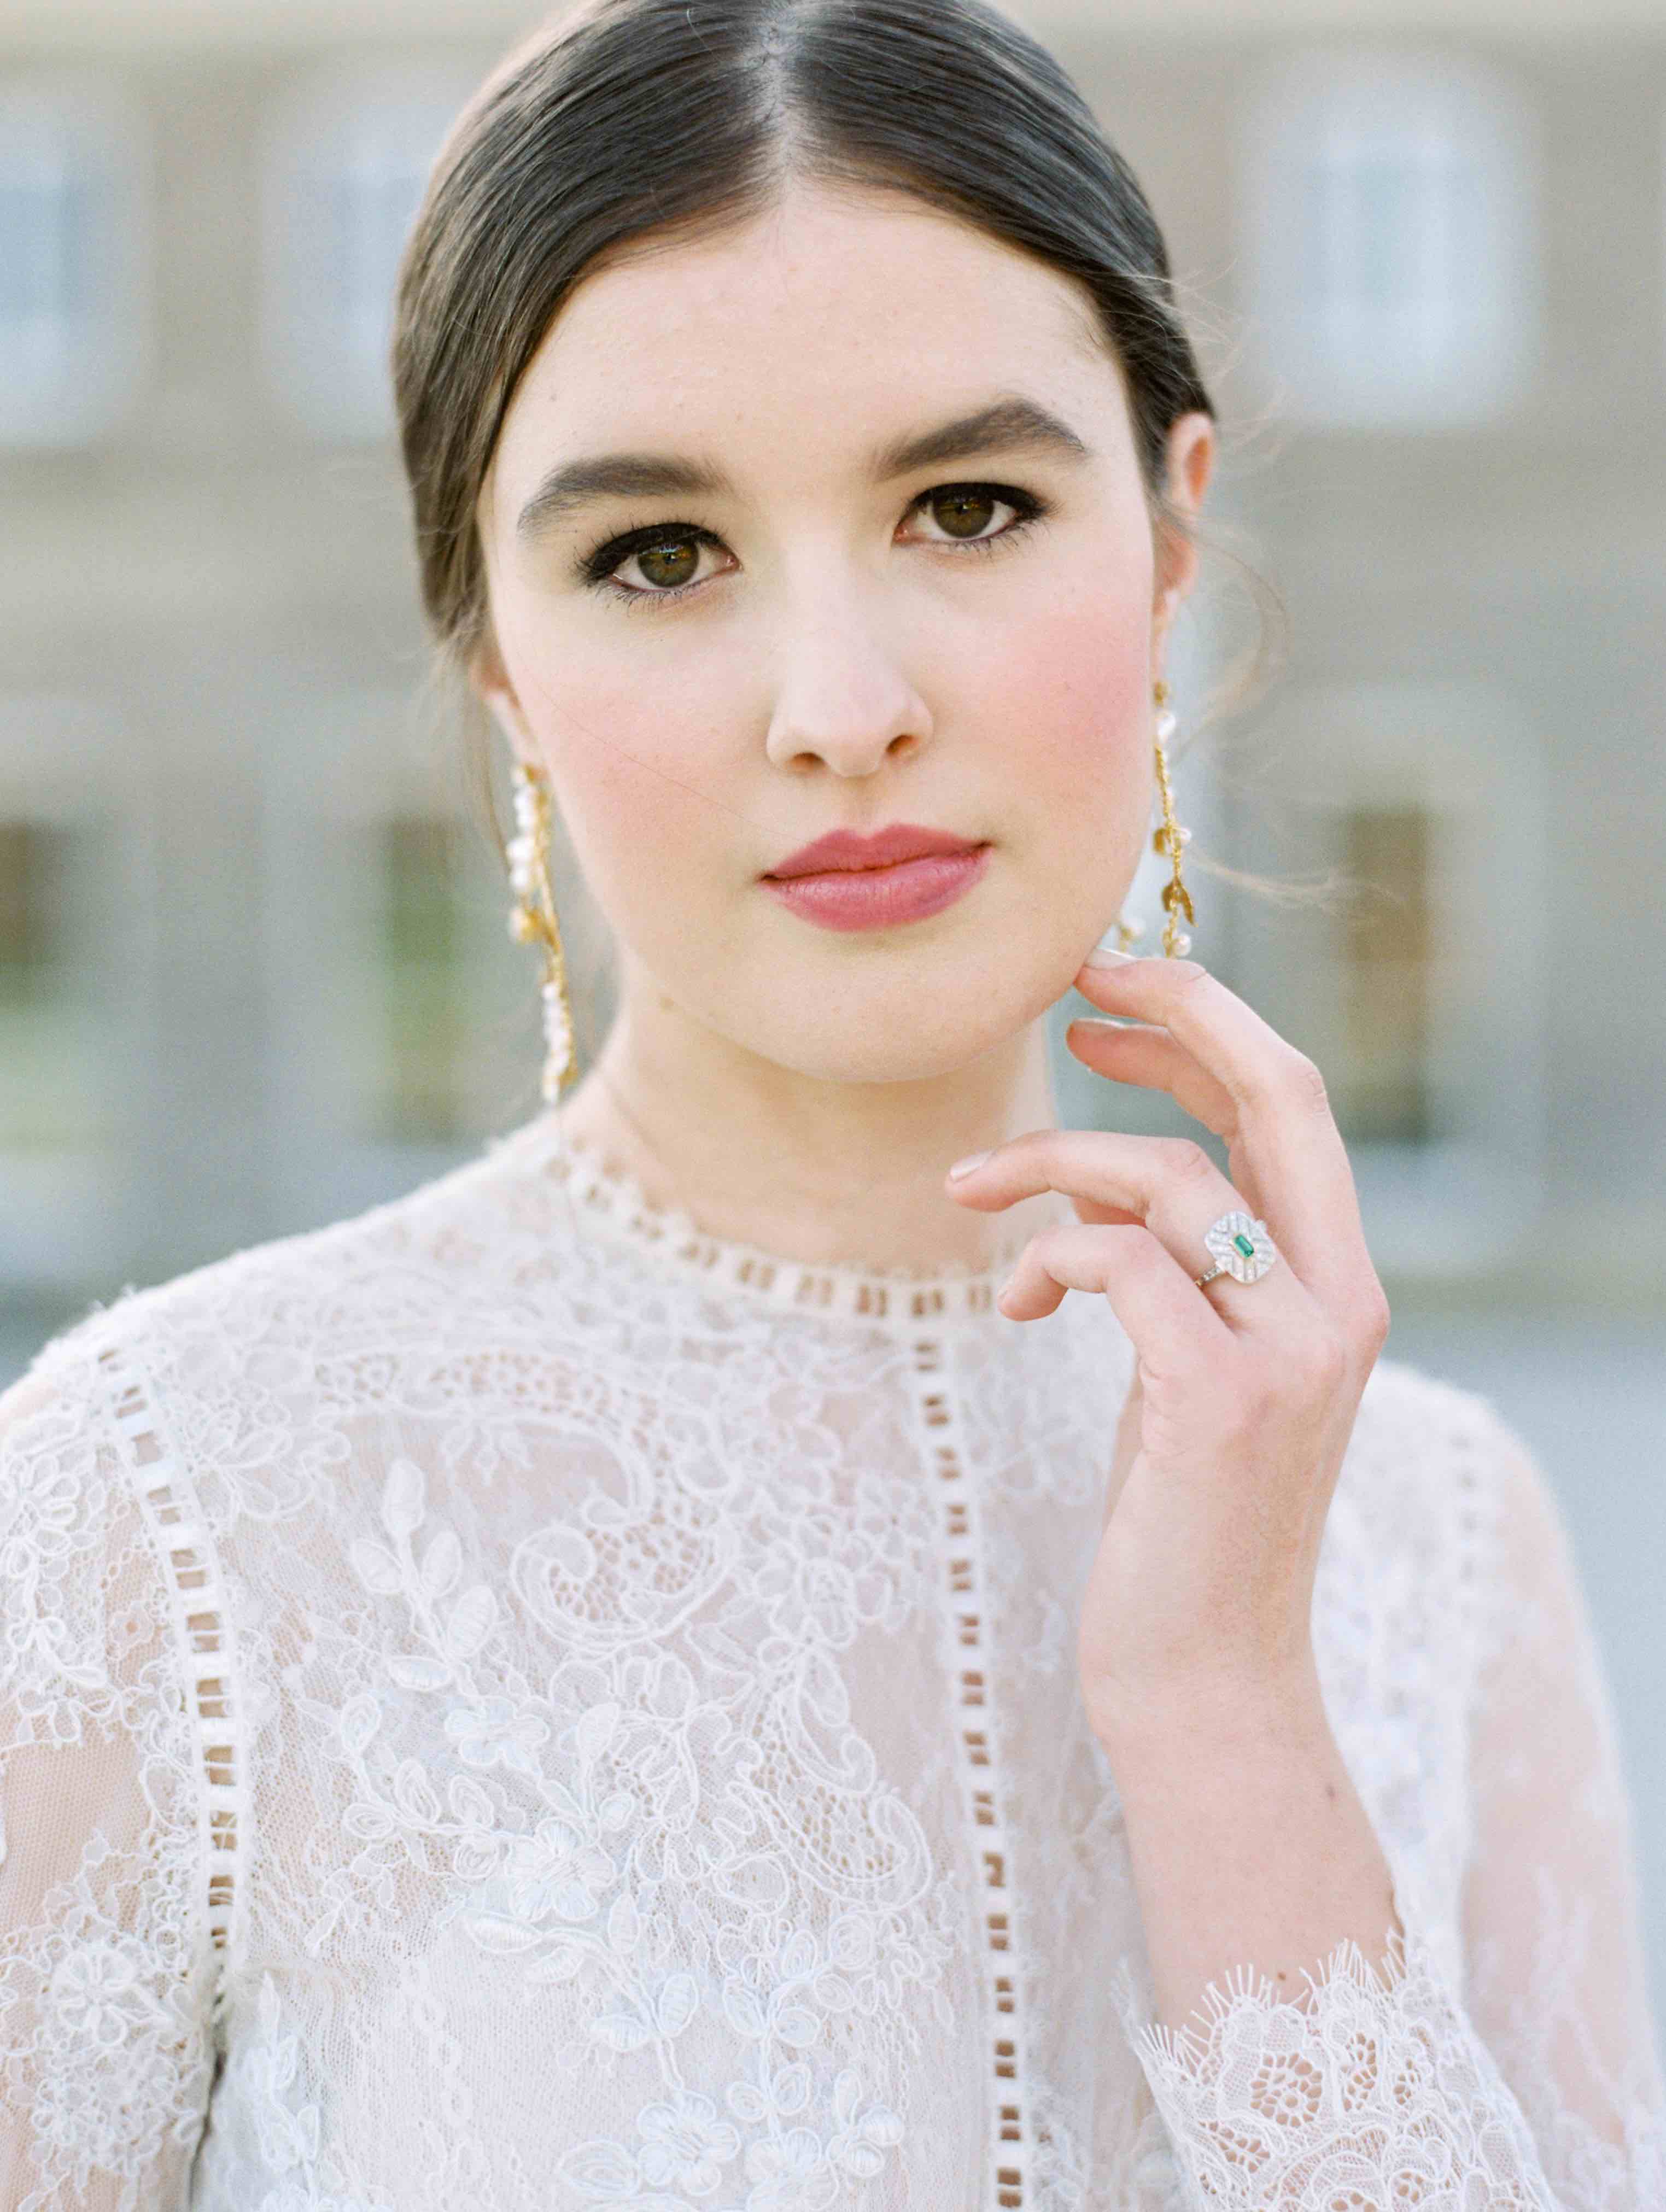 Romantic and elegant bridal hair and make-up | The Timeless Stylist | Hannah Duffy